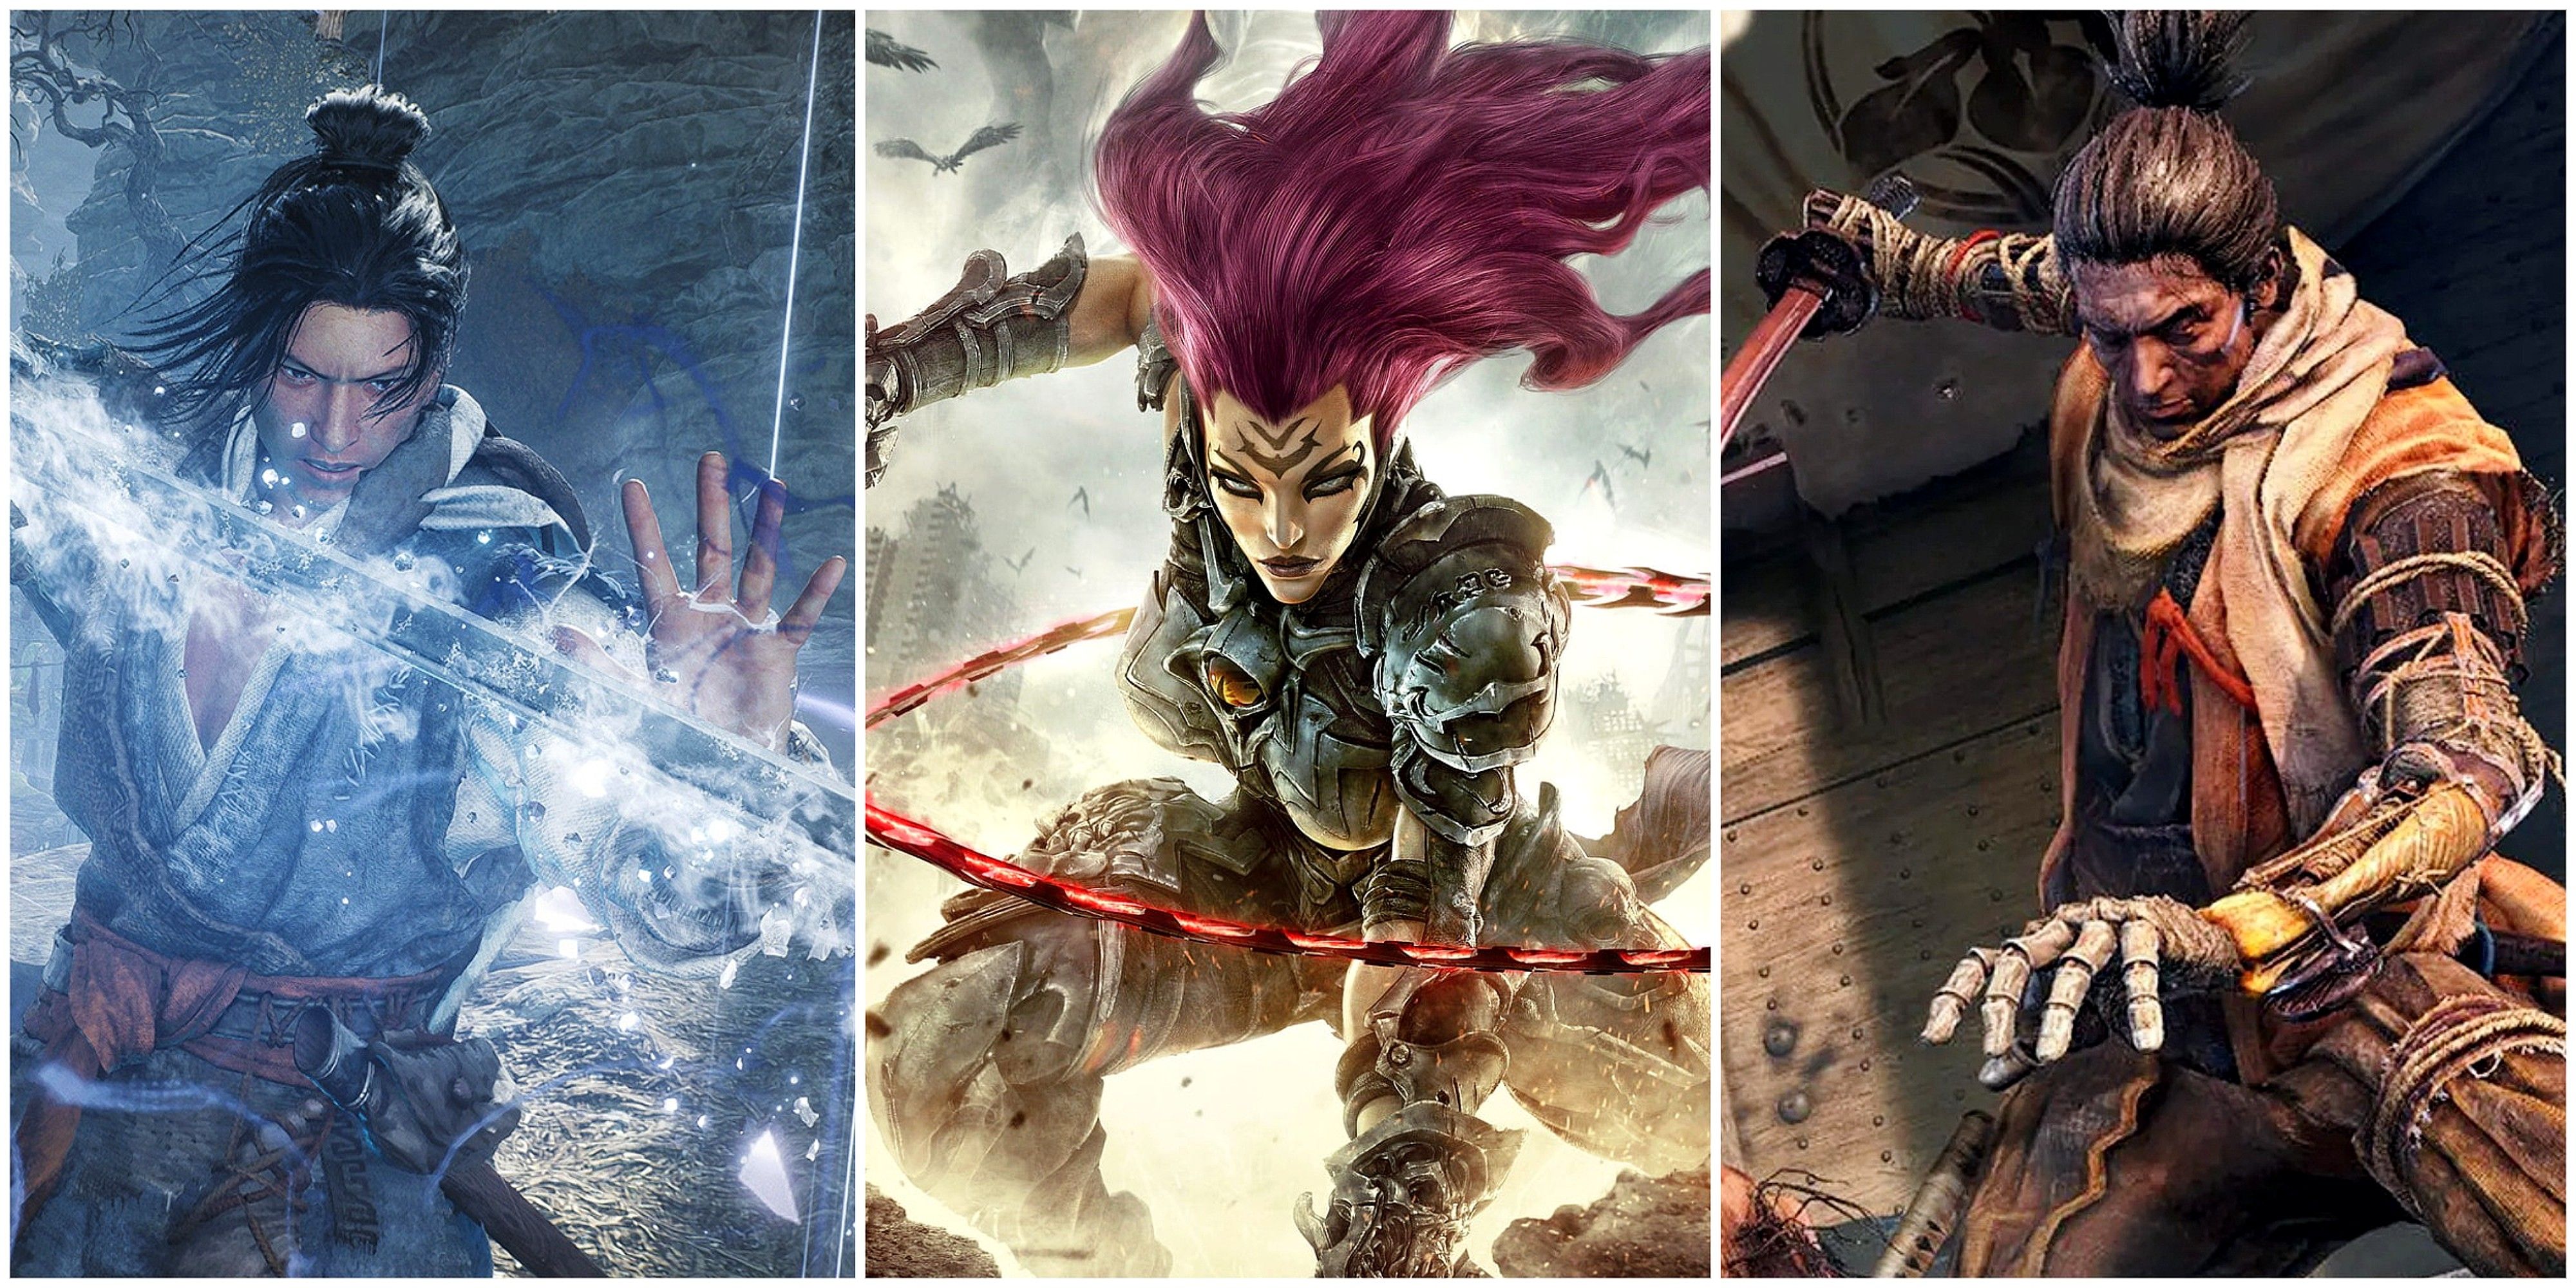 Best Soulslike Games With Fast-Paced Combat Include Wo Long, Darksiders 3, and Sekiro